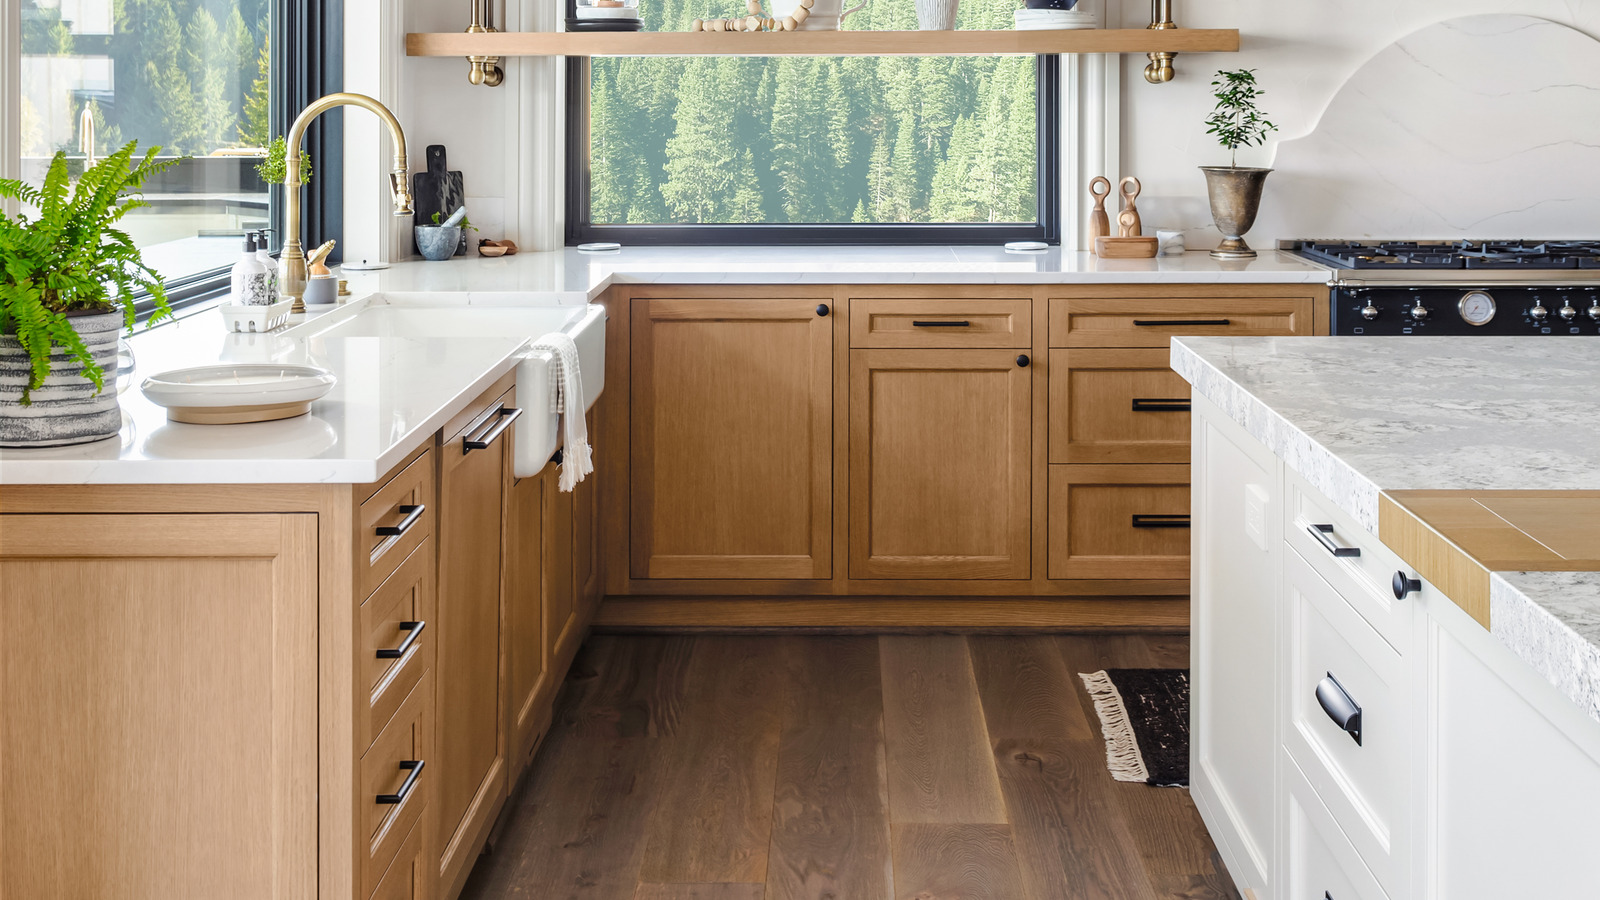 Top 3 Ways To Make A Traditional Kitchen Feel More Modern